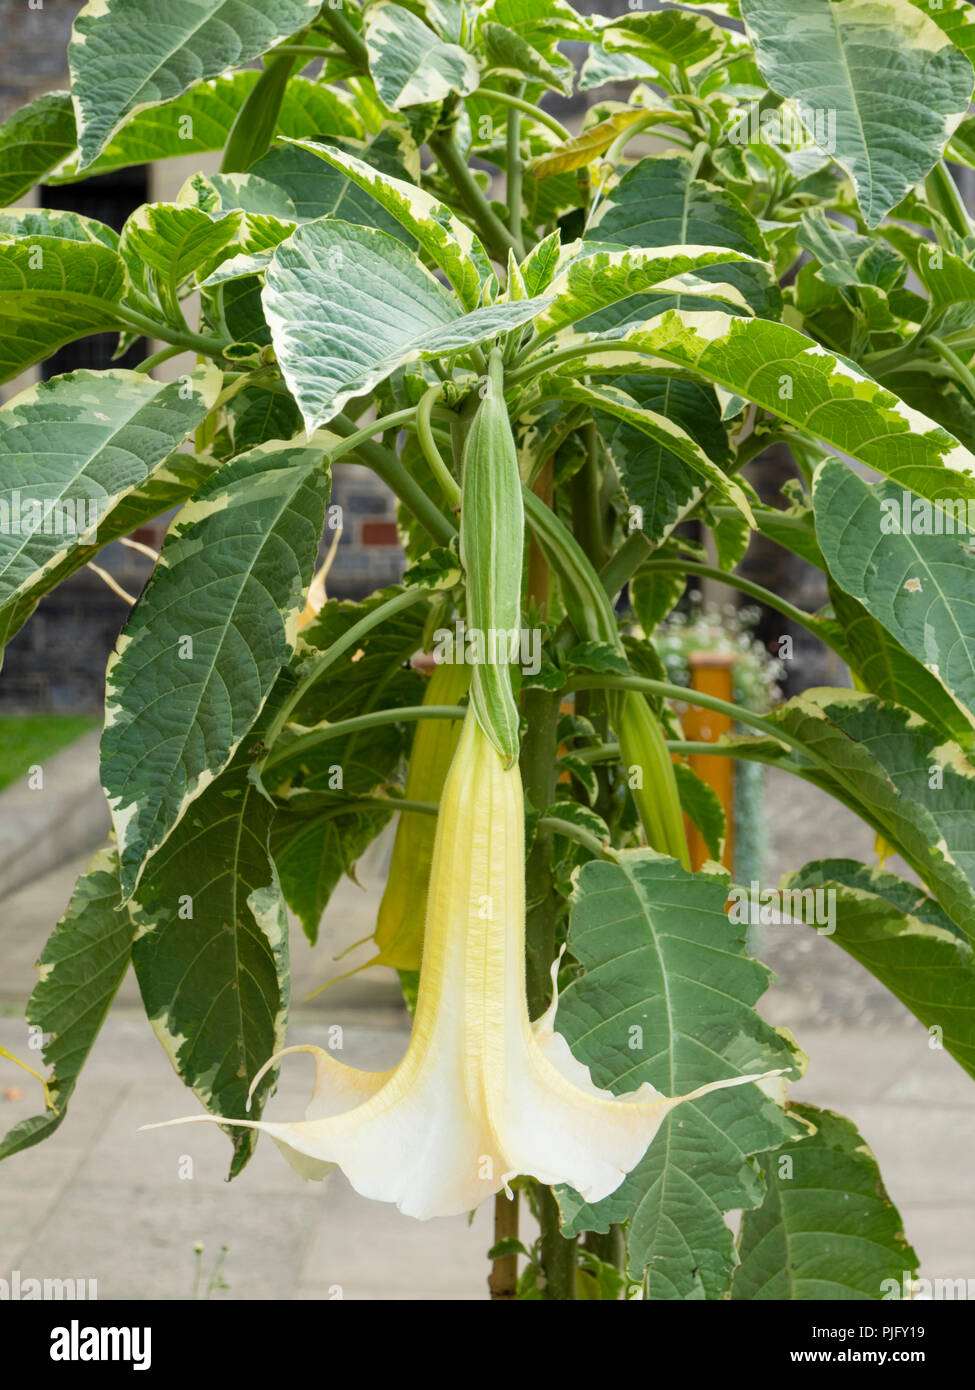 White edged foliage and large white trumpet flower of the tender exotic garden plant, Brugmansia x candida 'Variegata' Stock Photo